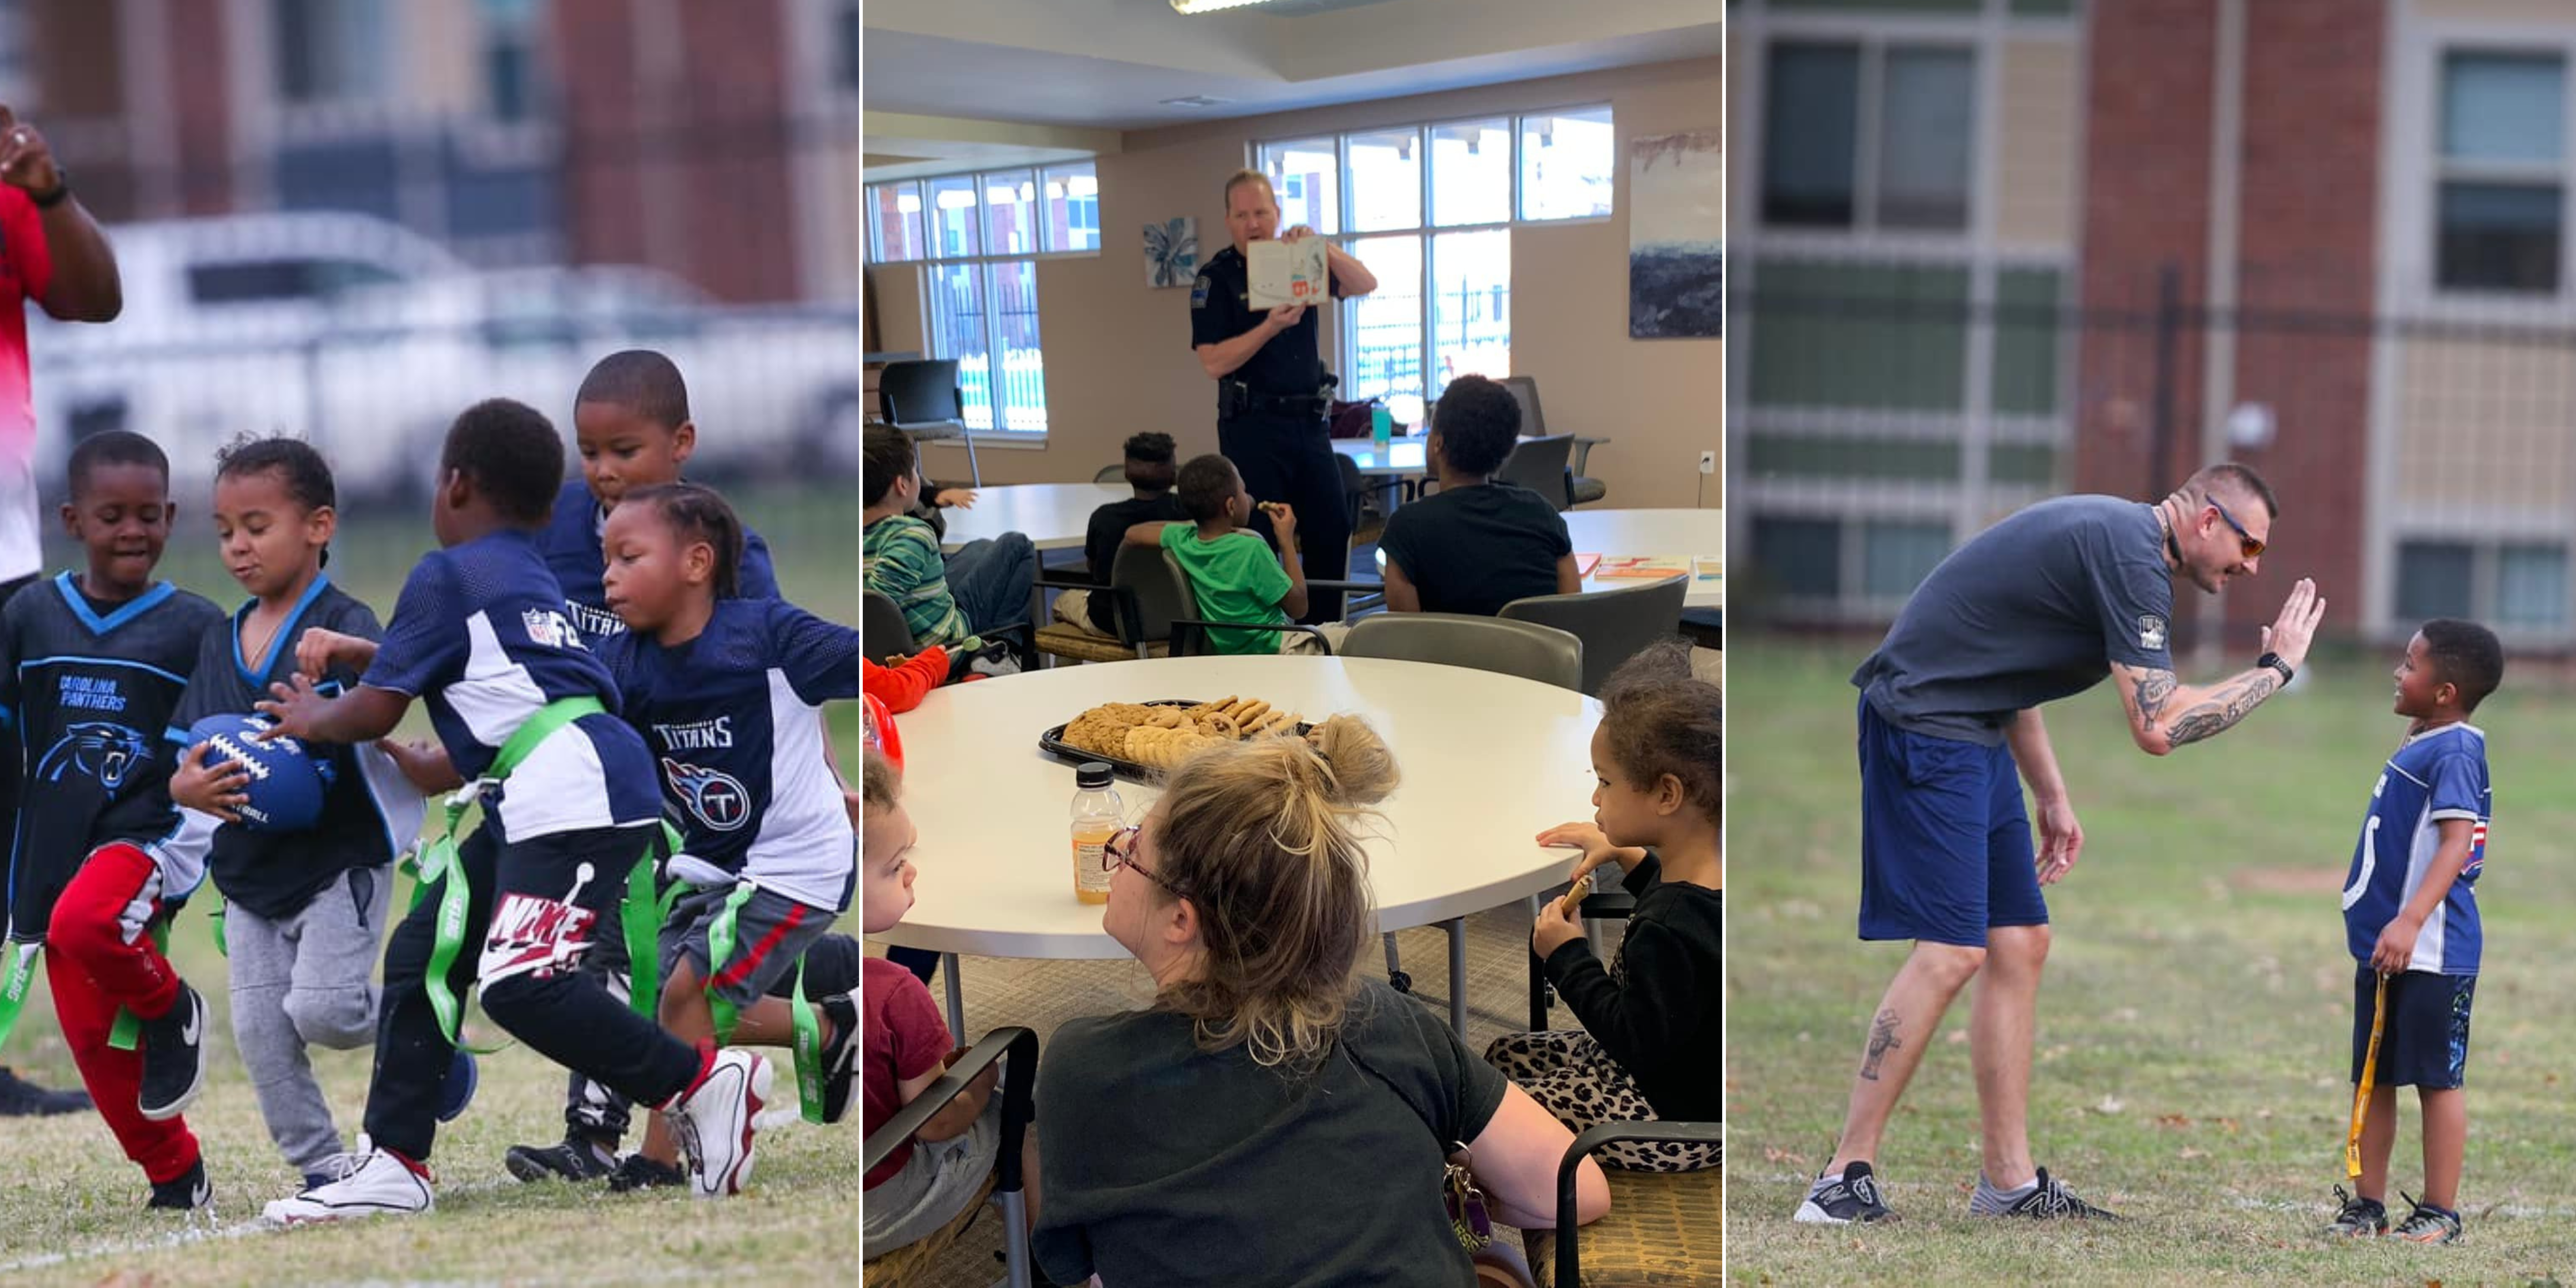 Photo collage of Crime Stoppers and Tulsa Police Department community youth events in Riverwood. Pictured are children playing tag football, a police officer reading a story to children in the area, and a police officer high-fiving a young boy at the tag football game.